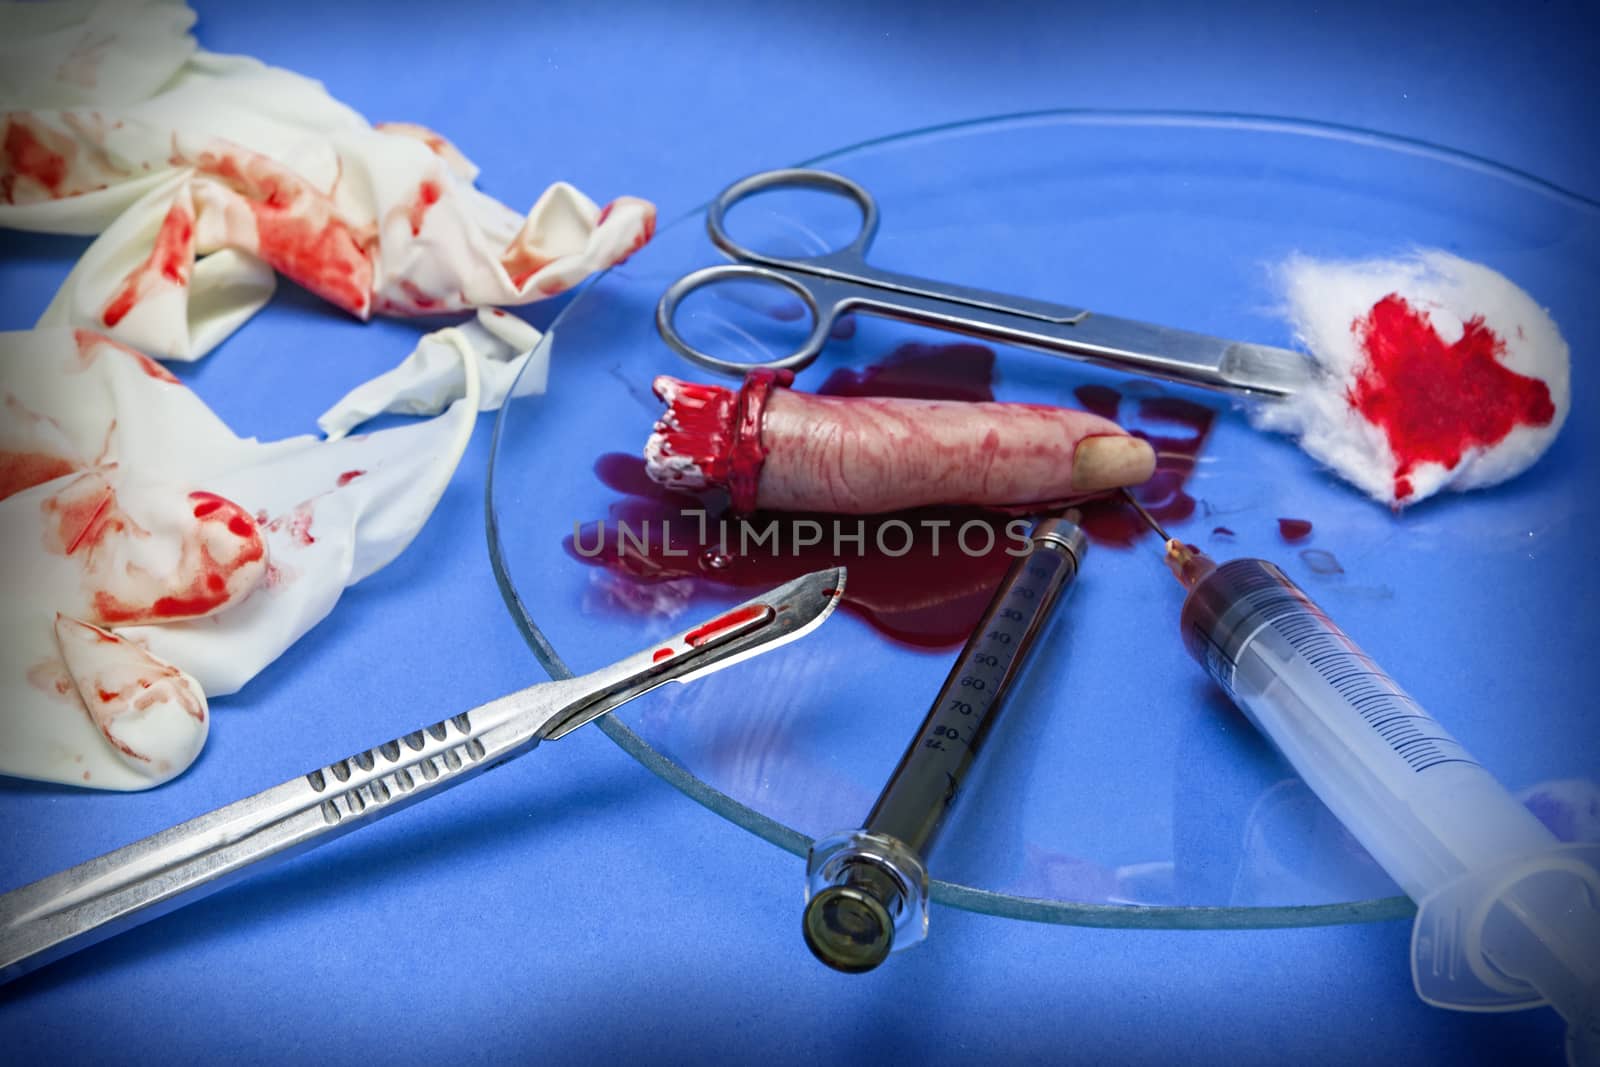 transplant of index finger, instruments during a surgical proced by digicomphoto